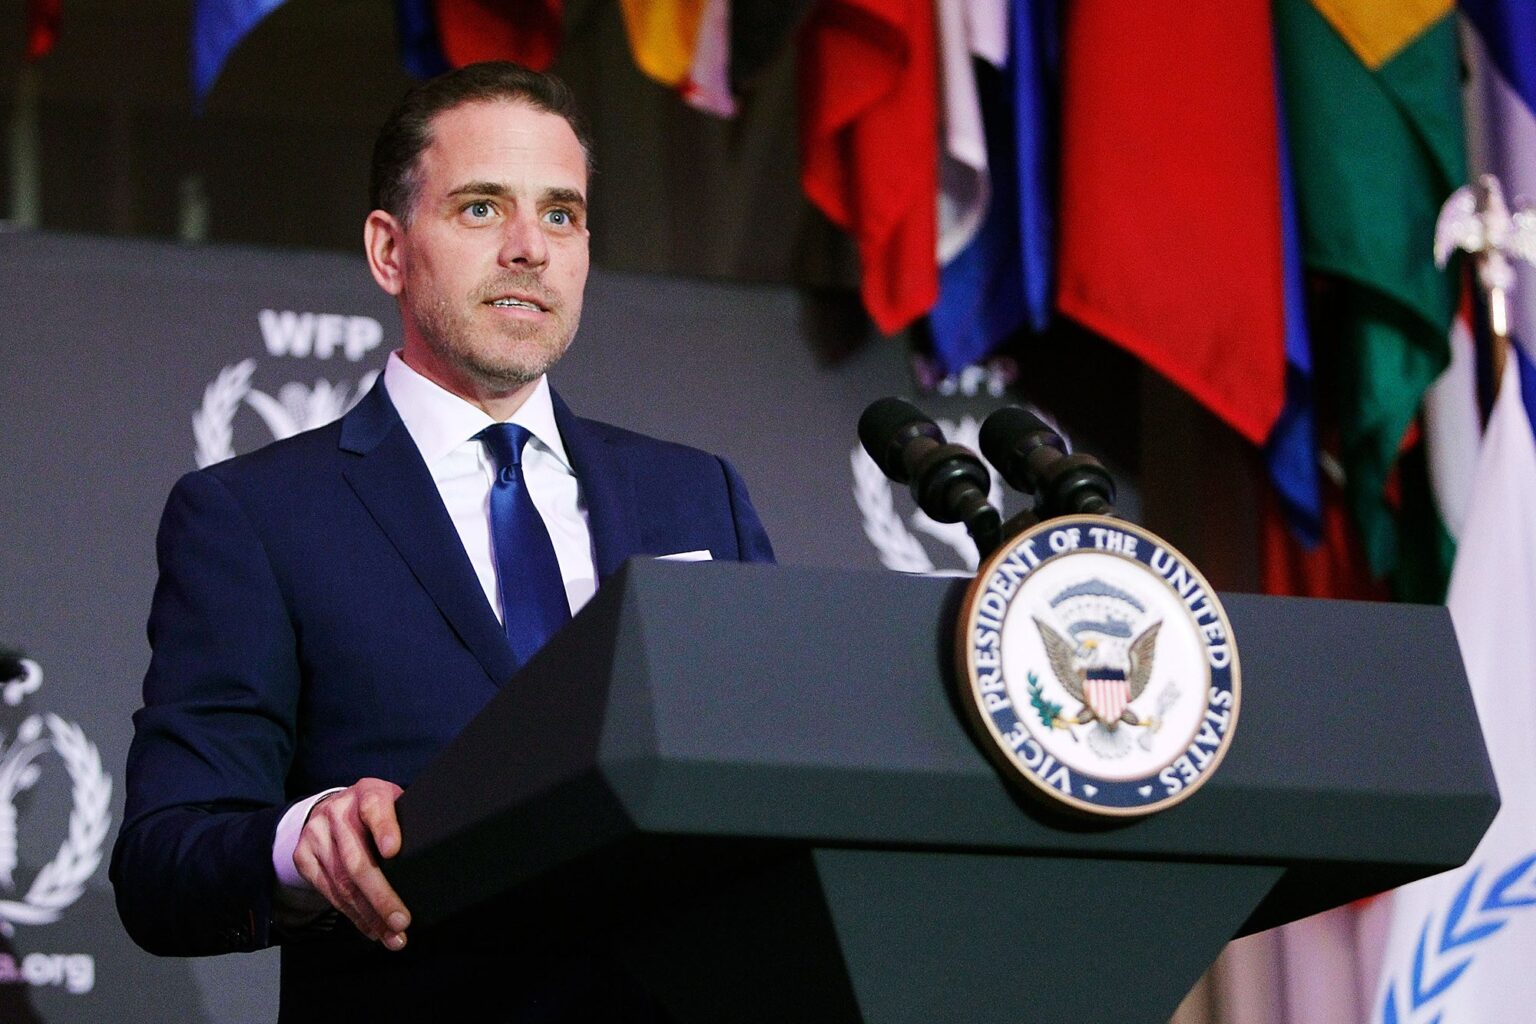 Could former VP Joe Biden has been carrying on inappropriate ties with Ukraine with son Hunter Biden? Let's find out.